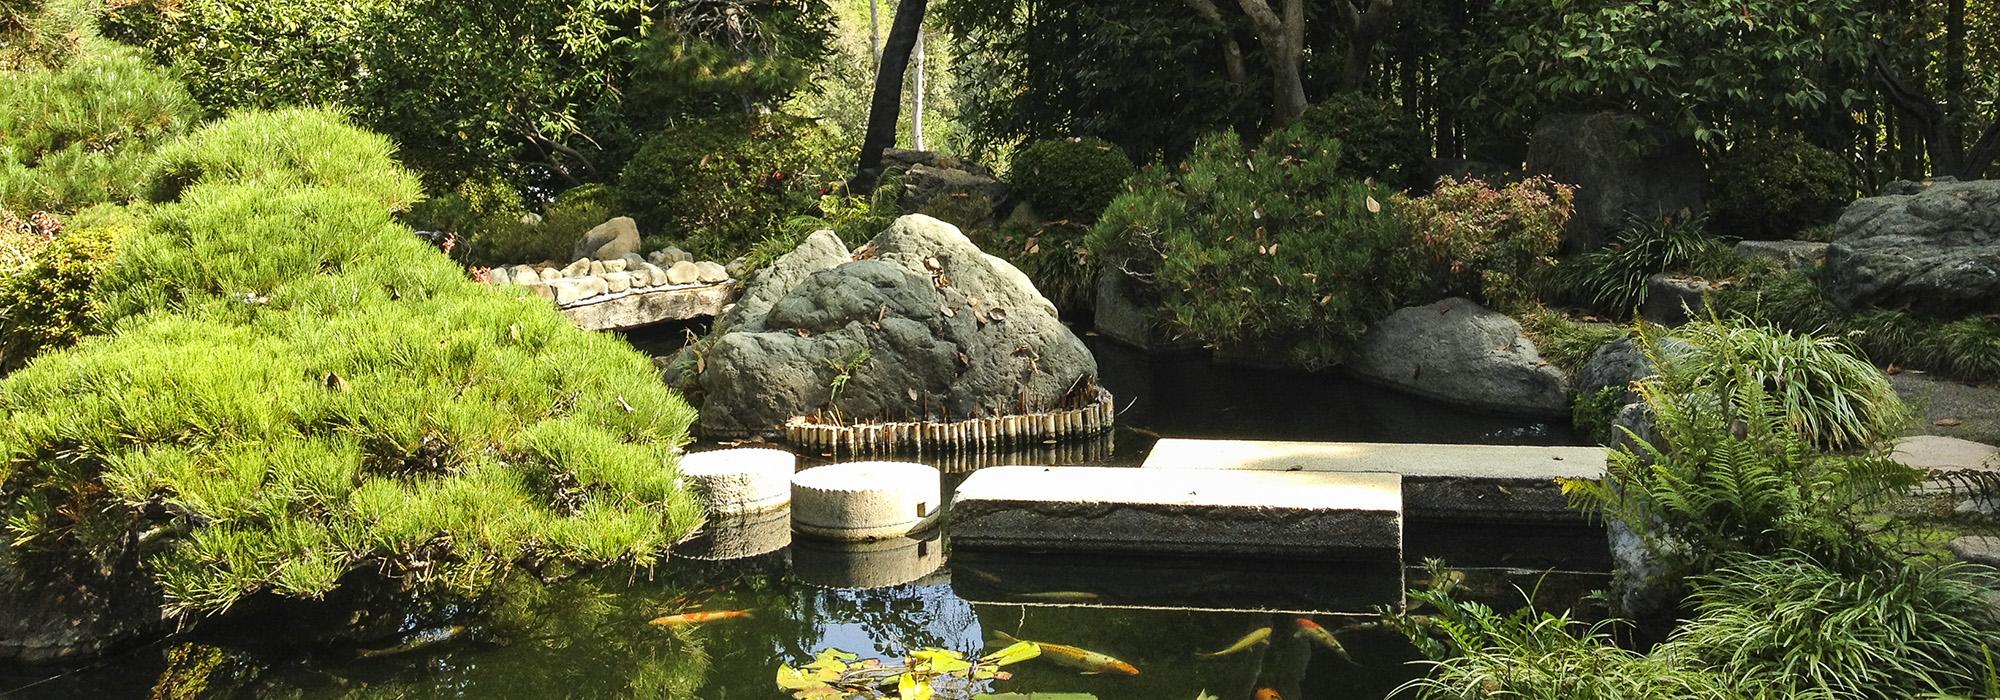 Hannah Carter Japanese Garden Sold For 12 5m The Cultural